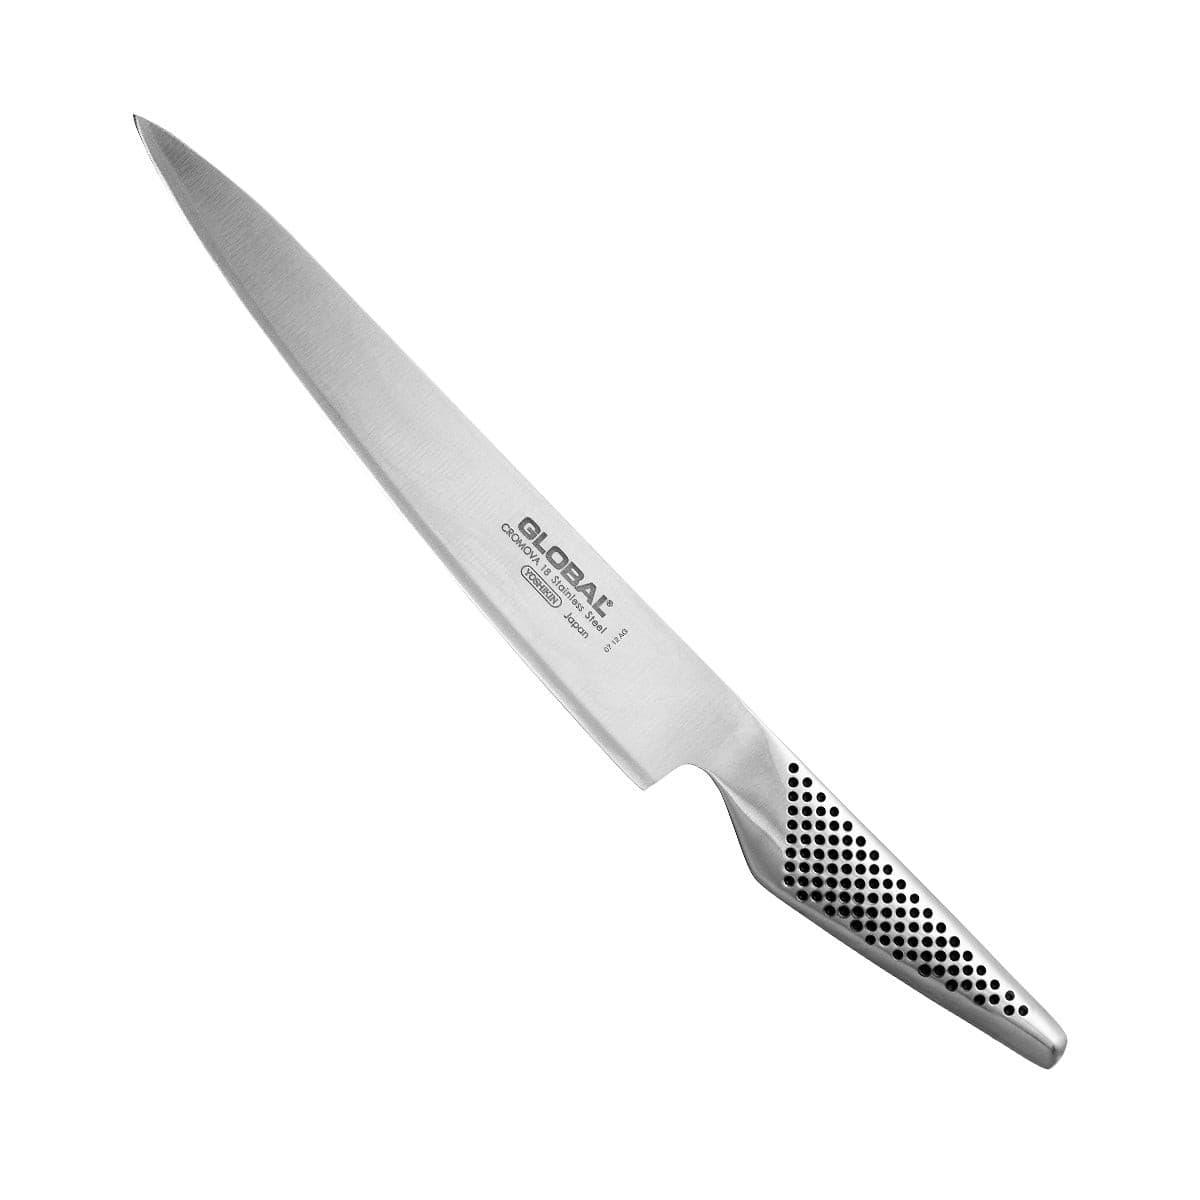 Global 20cm Carving Knife - GS-101 - Knife Store